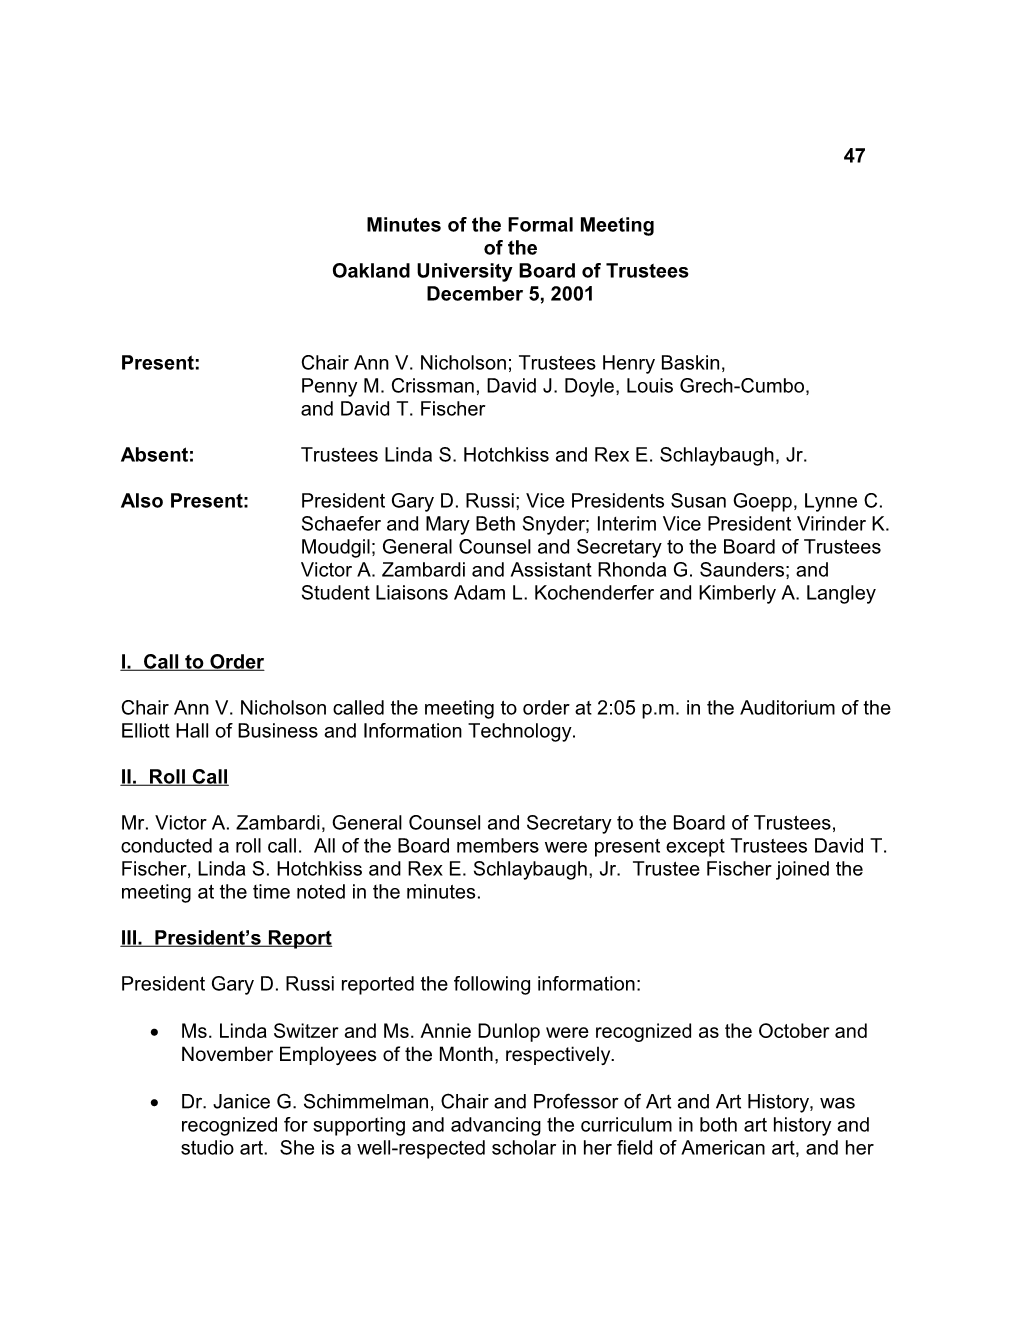 Minutes of the Formal Meeting